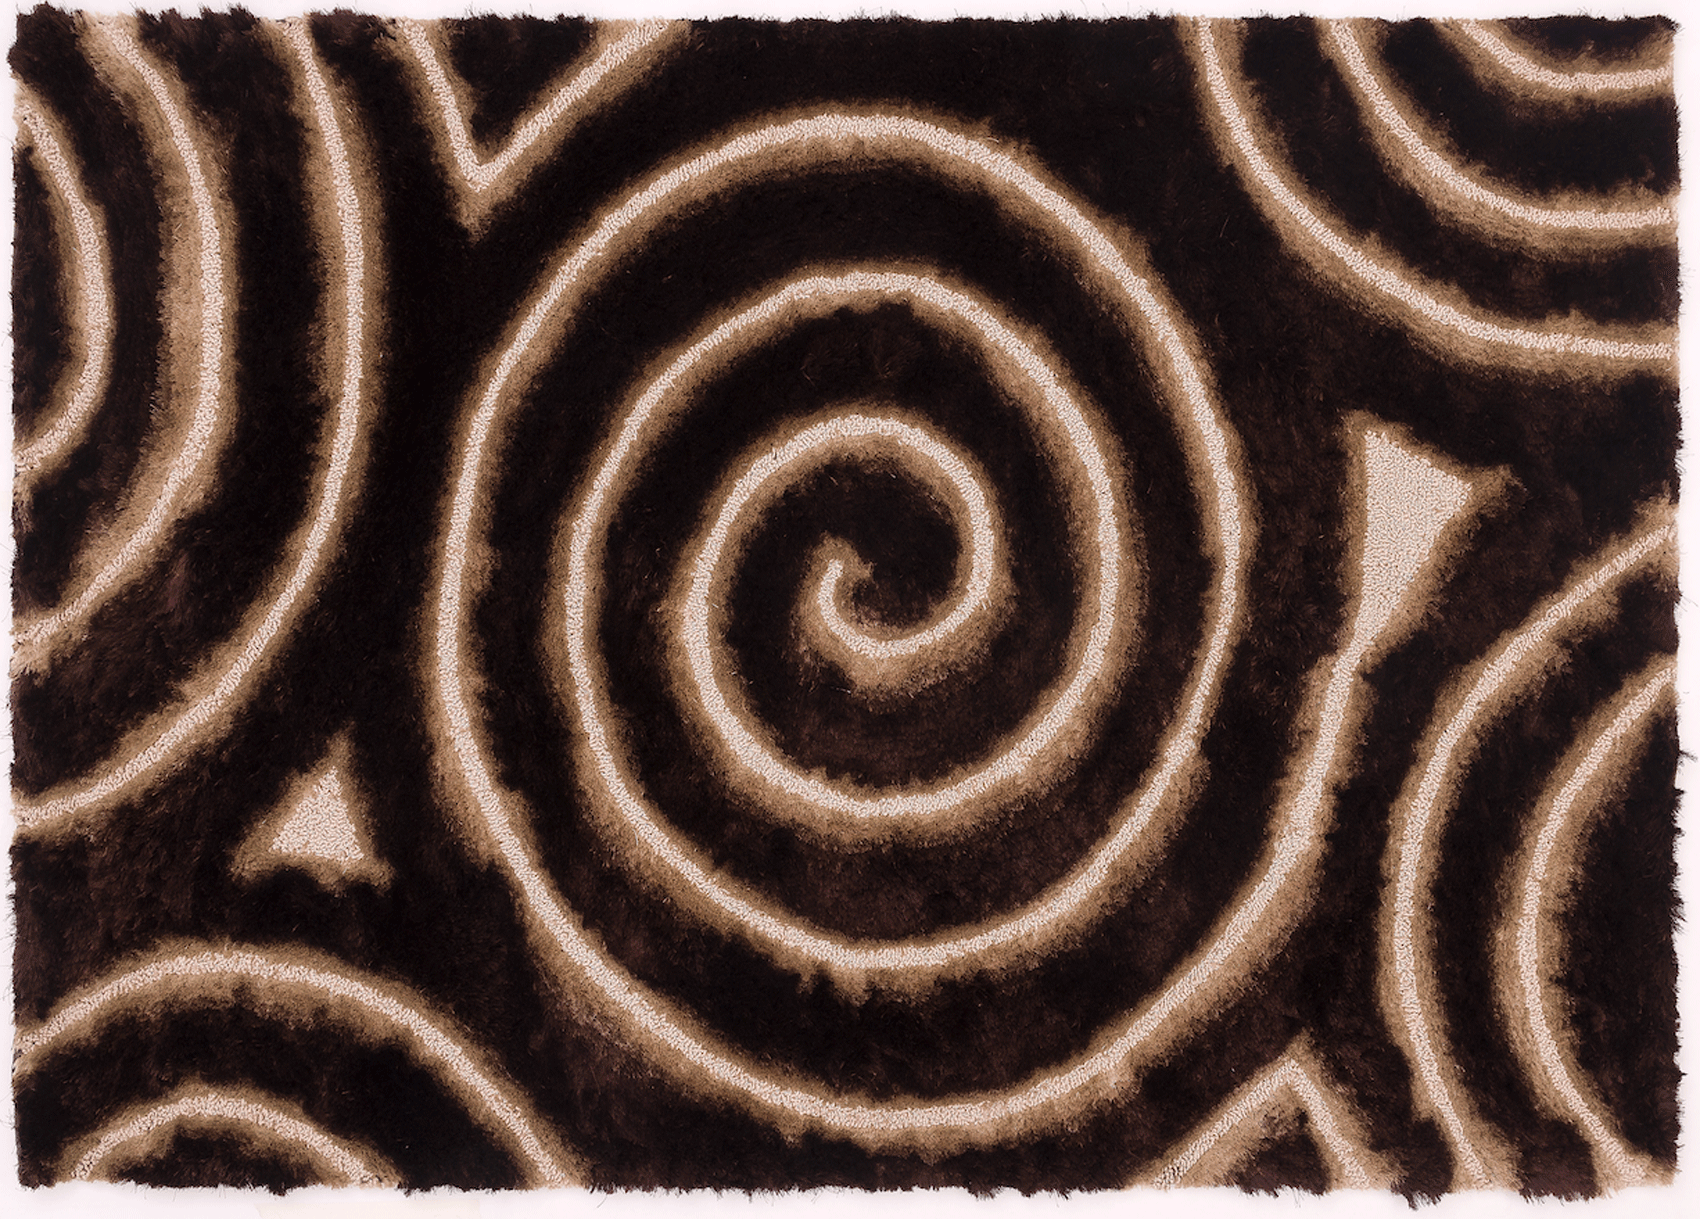 Brands Camel Classic Collection, Italy Spiral 3D Rug